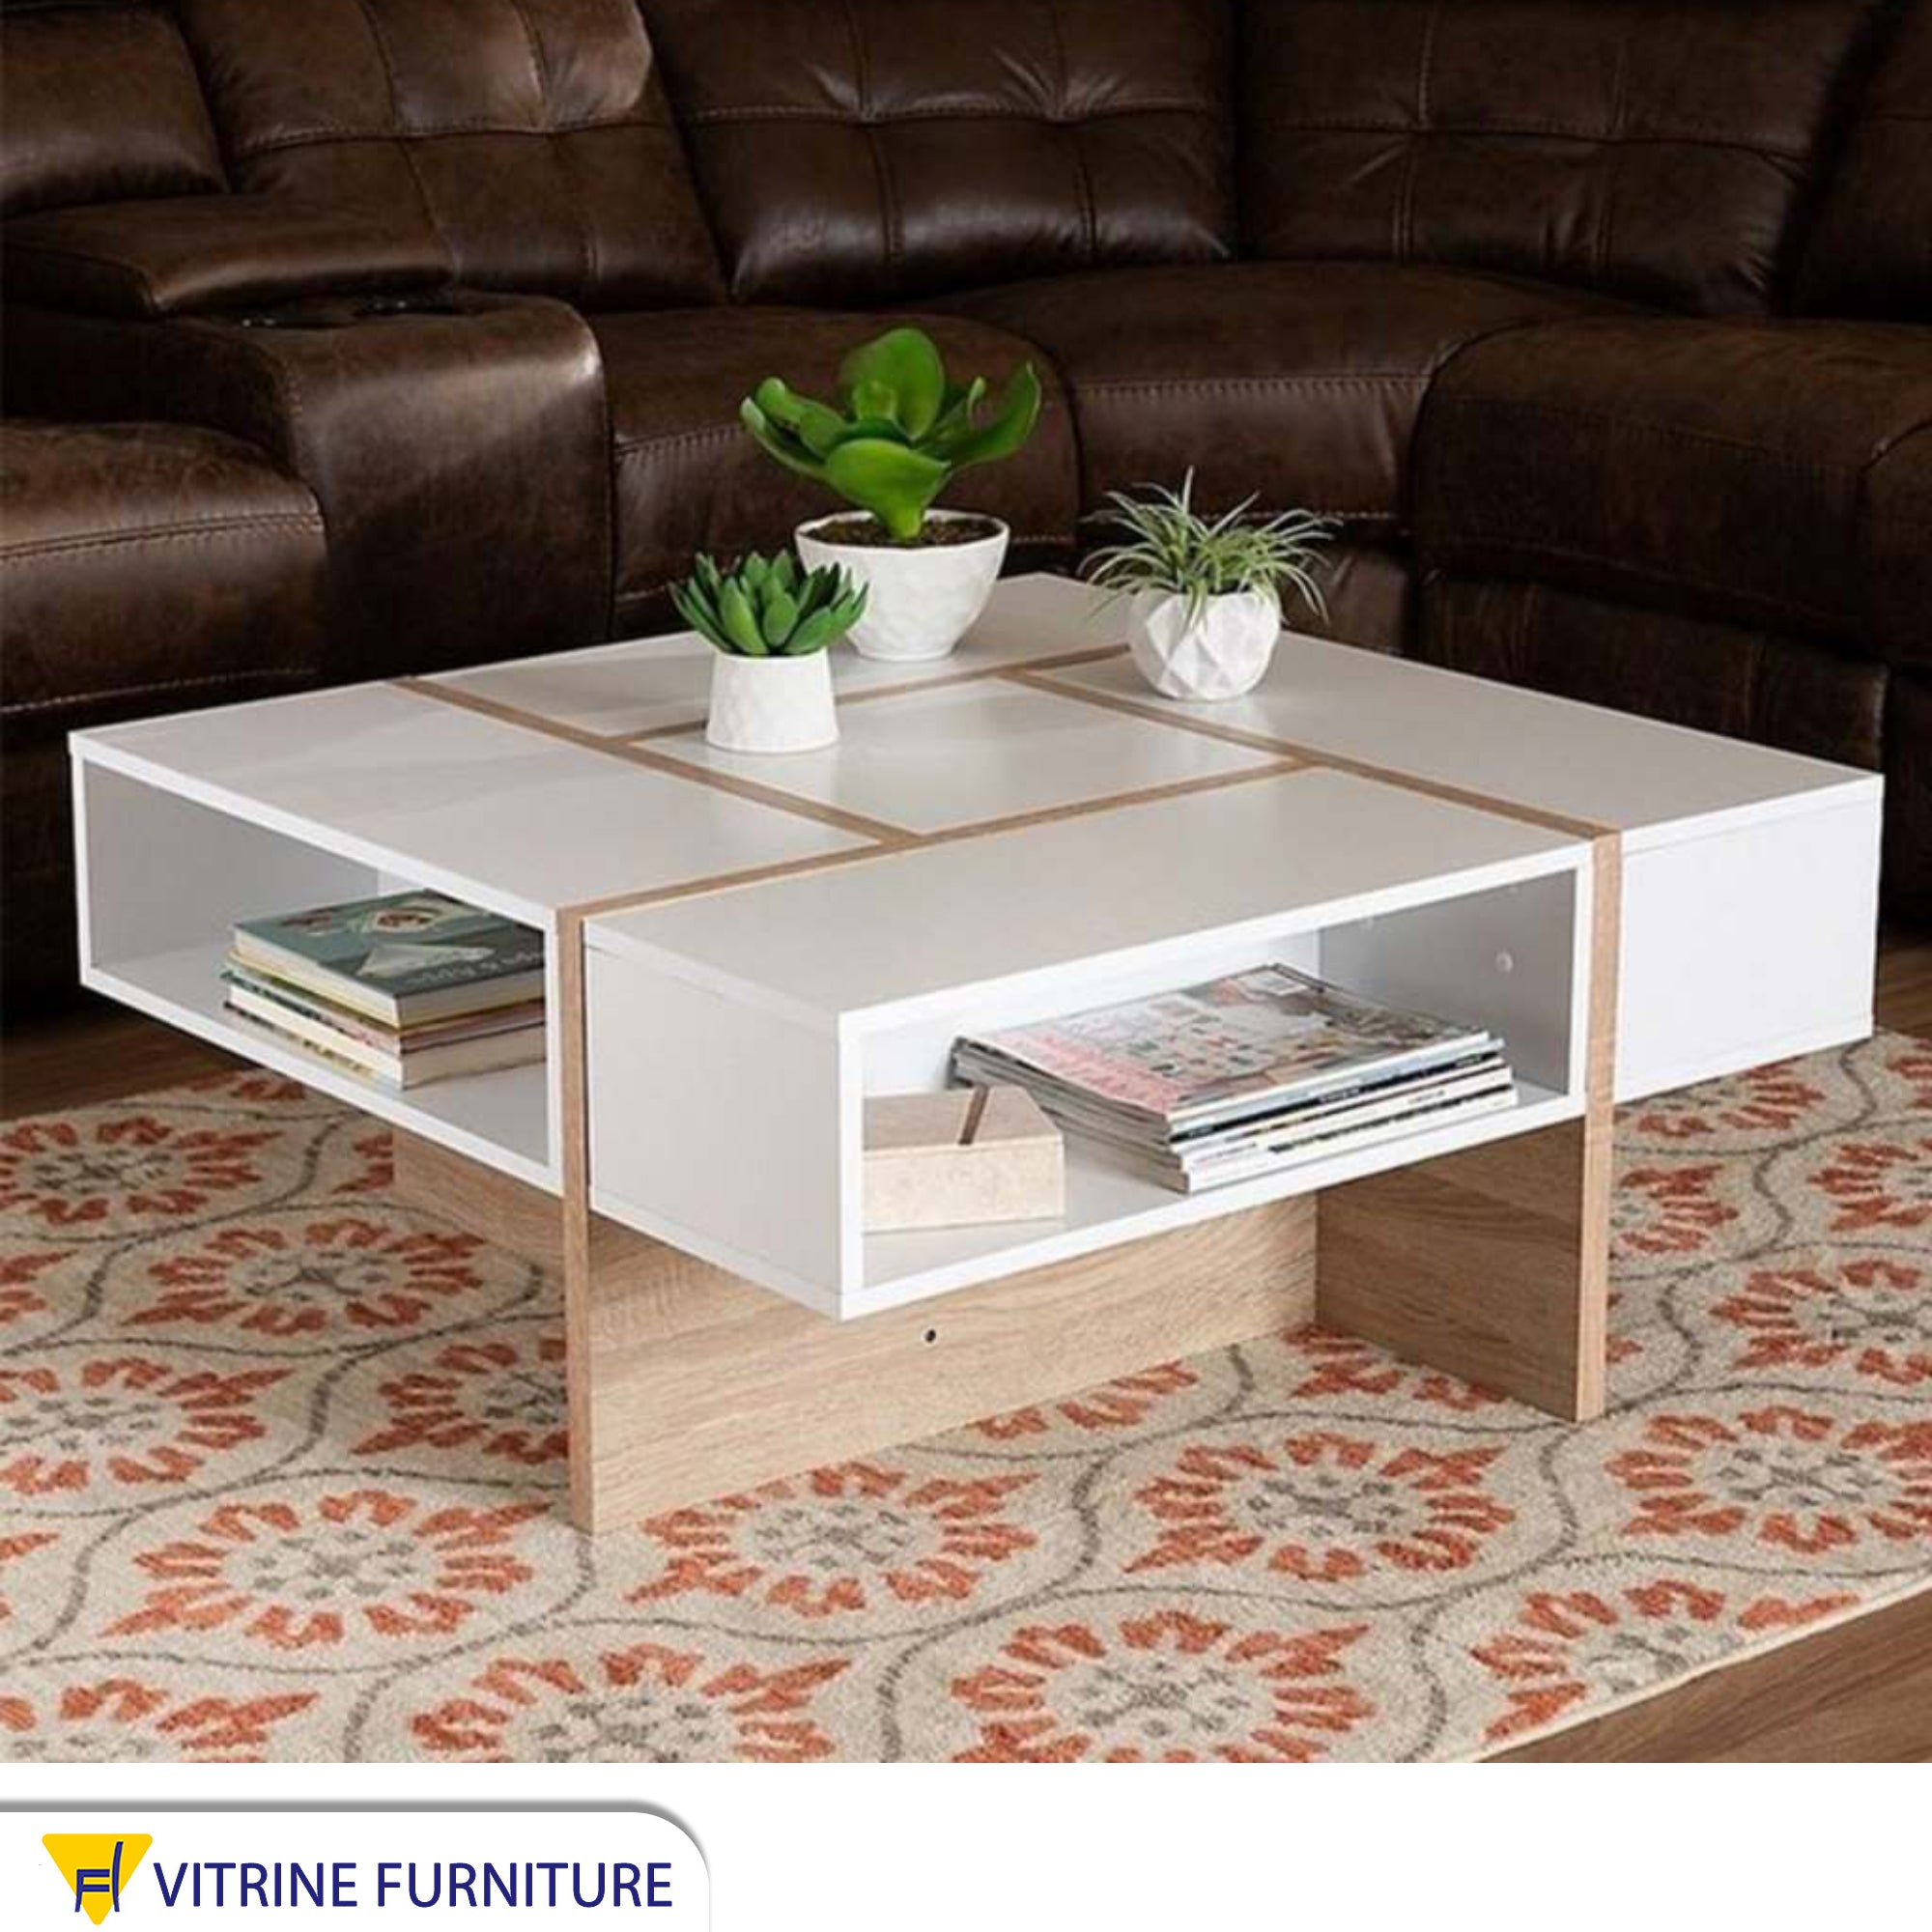 Cube-shaped center table